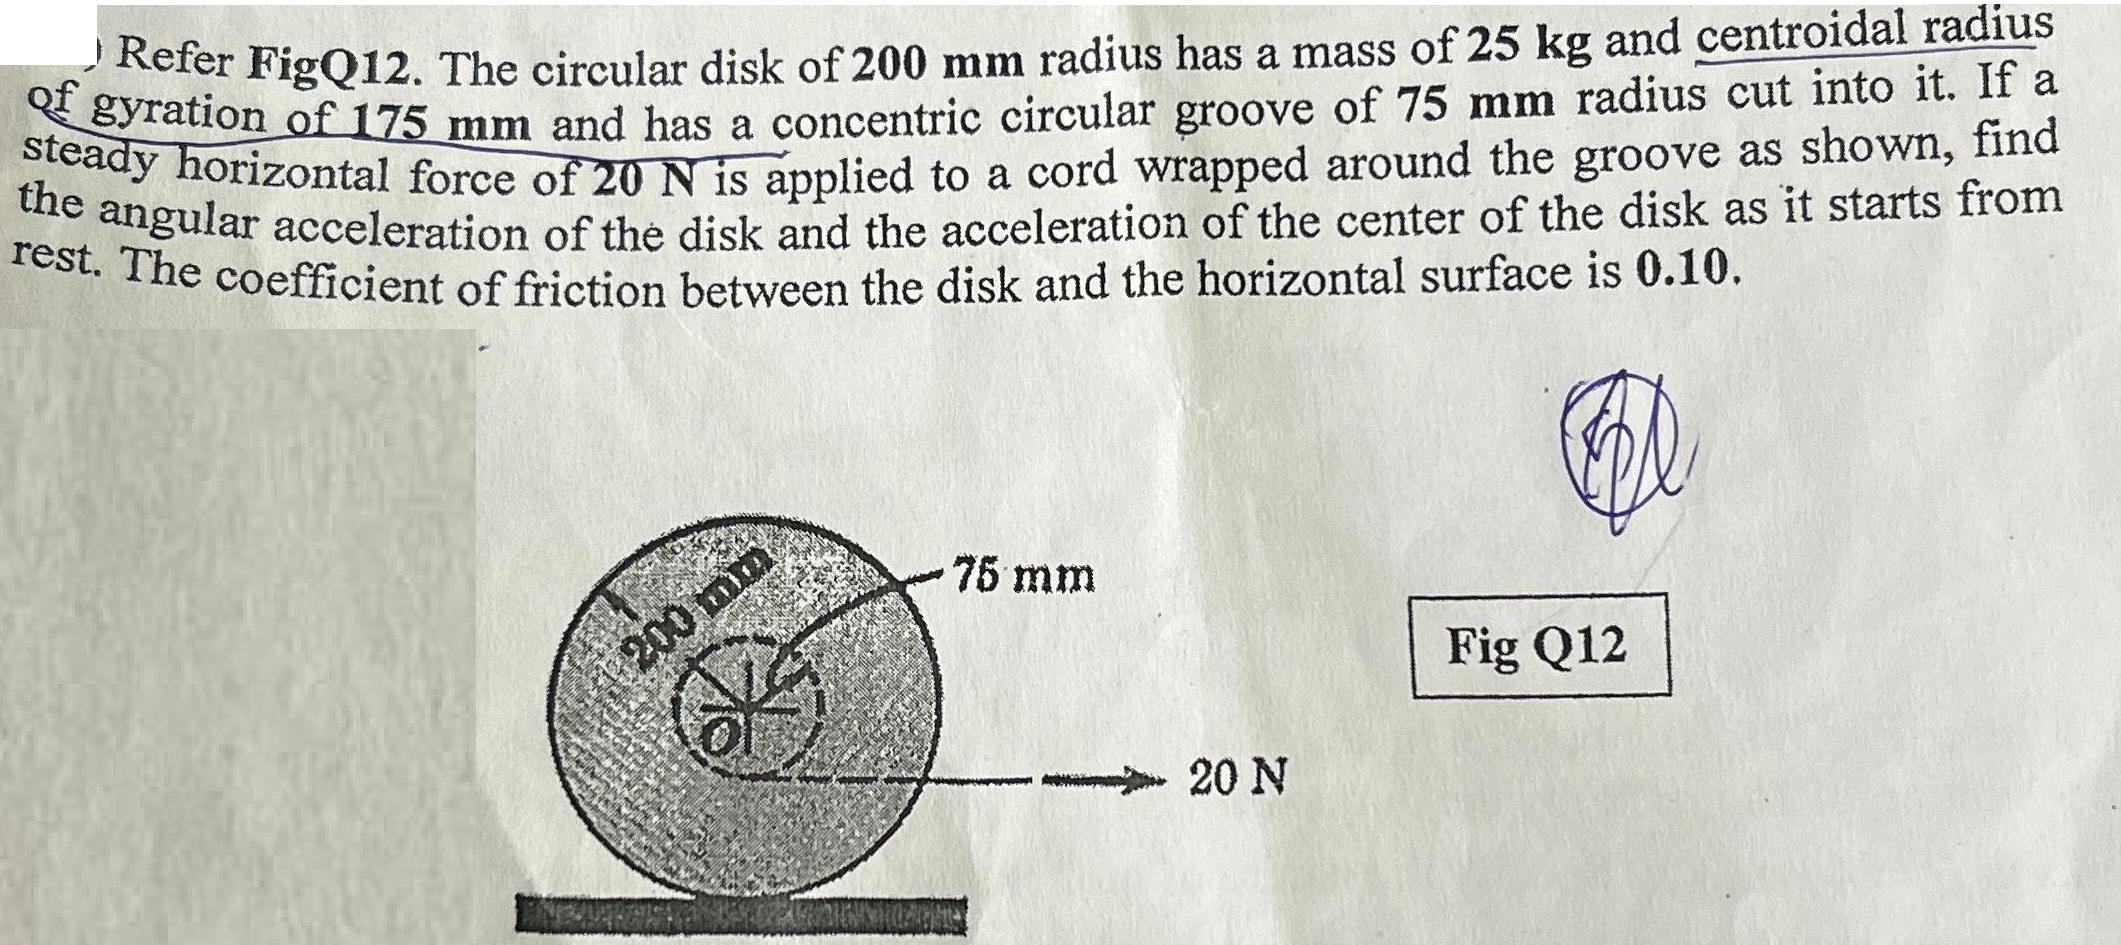 Refer FigQ12. The circular disk of 200 mm radius has a mass of 25 kg and centroidal radius of gyration of 175